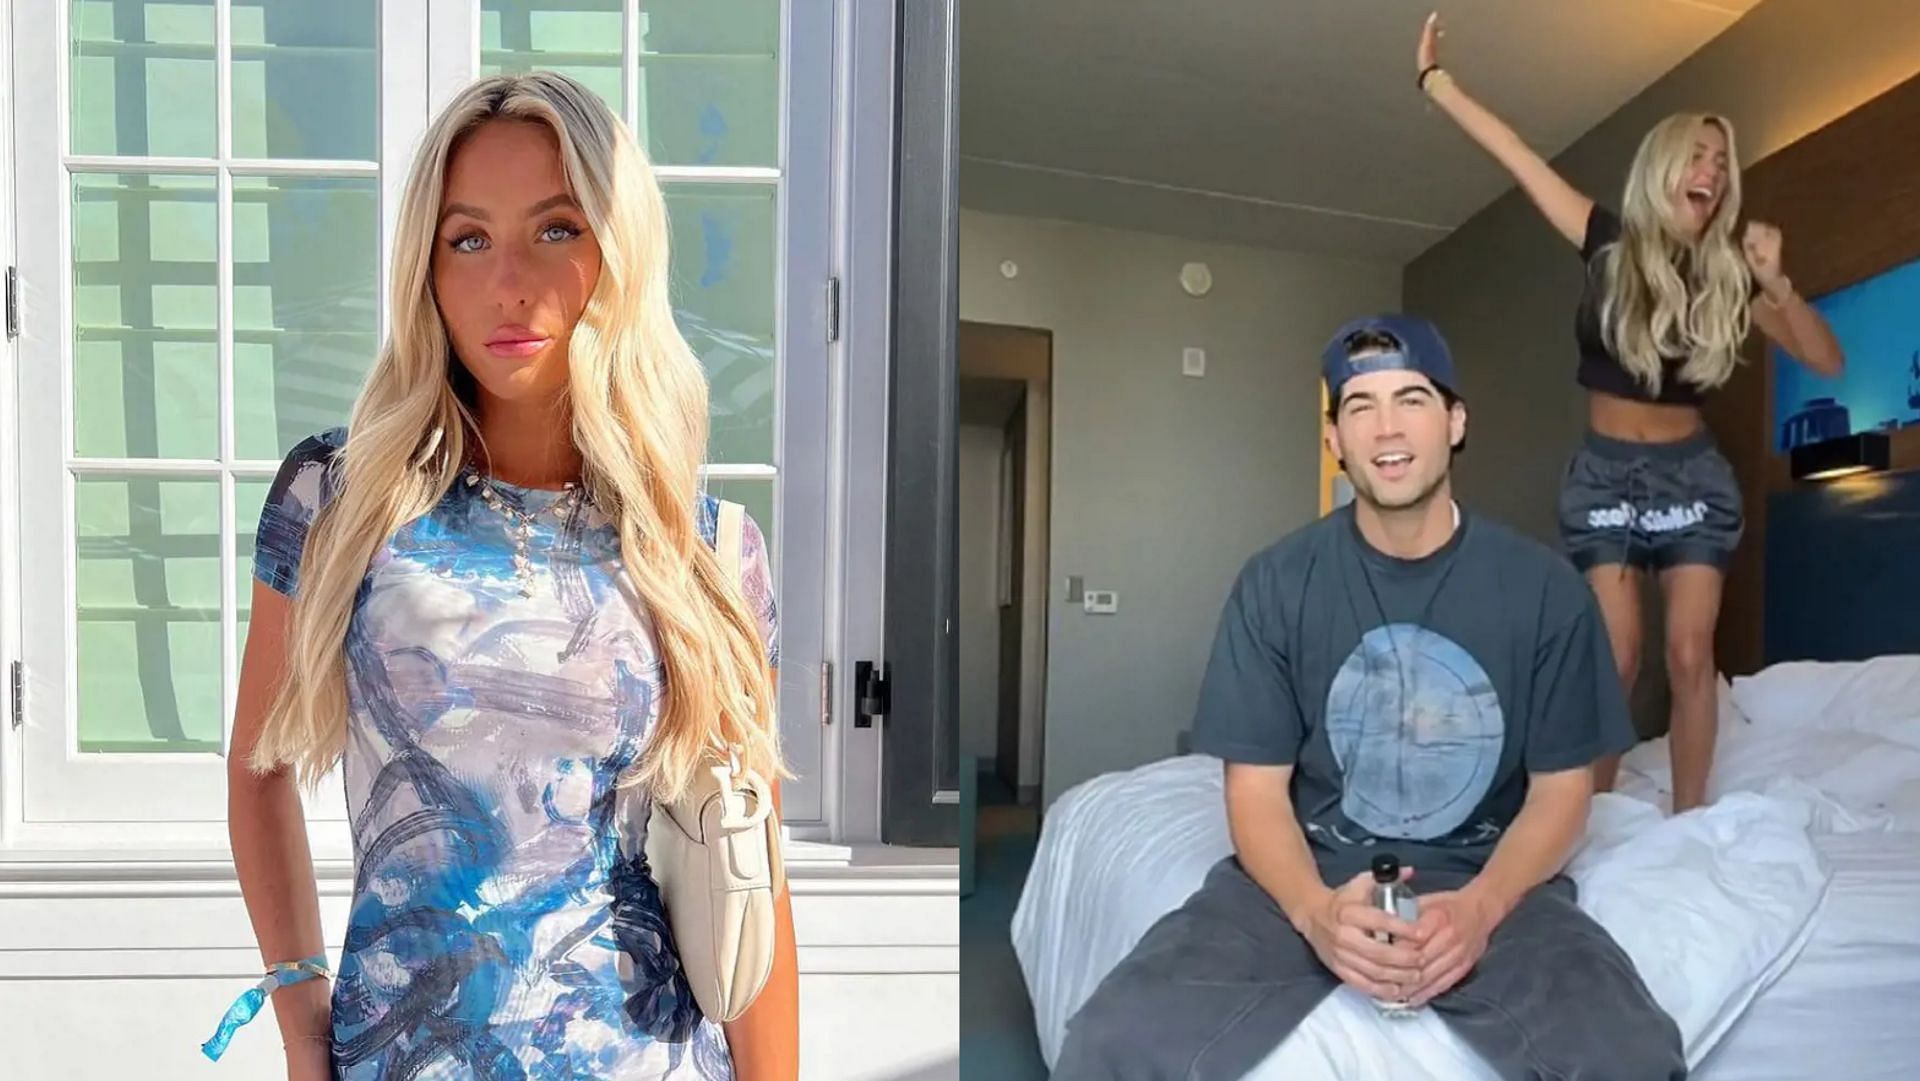 Alix Earle: Who is Alix Earle? TikTok star confirms breakup with